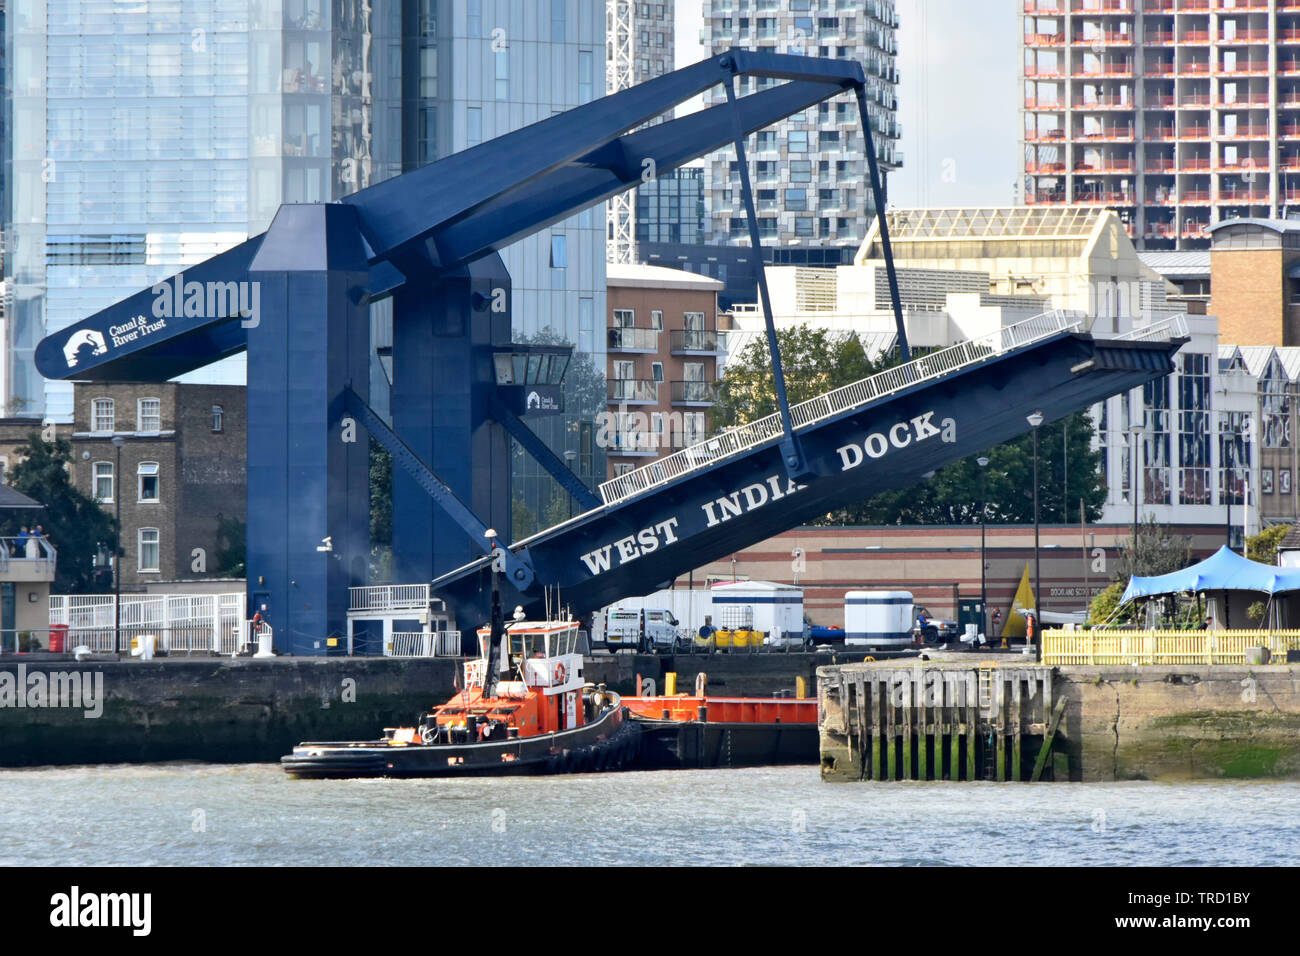 Entrance for tug boat to South Dock of West India Docks access to Canary Wharf estate via River Thames & raised modern road bridge London Docklands UK Stock Photo